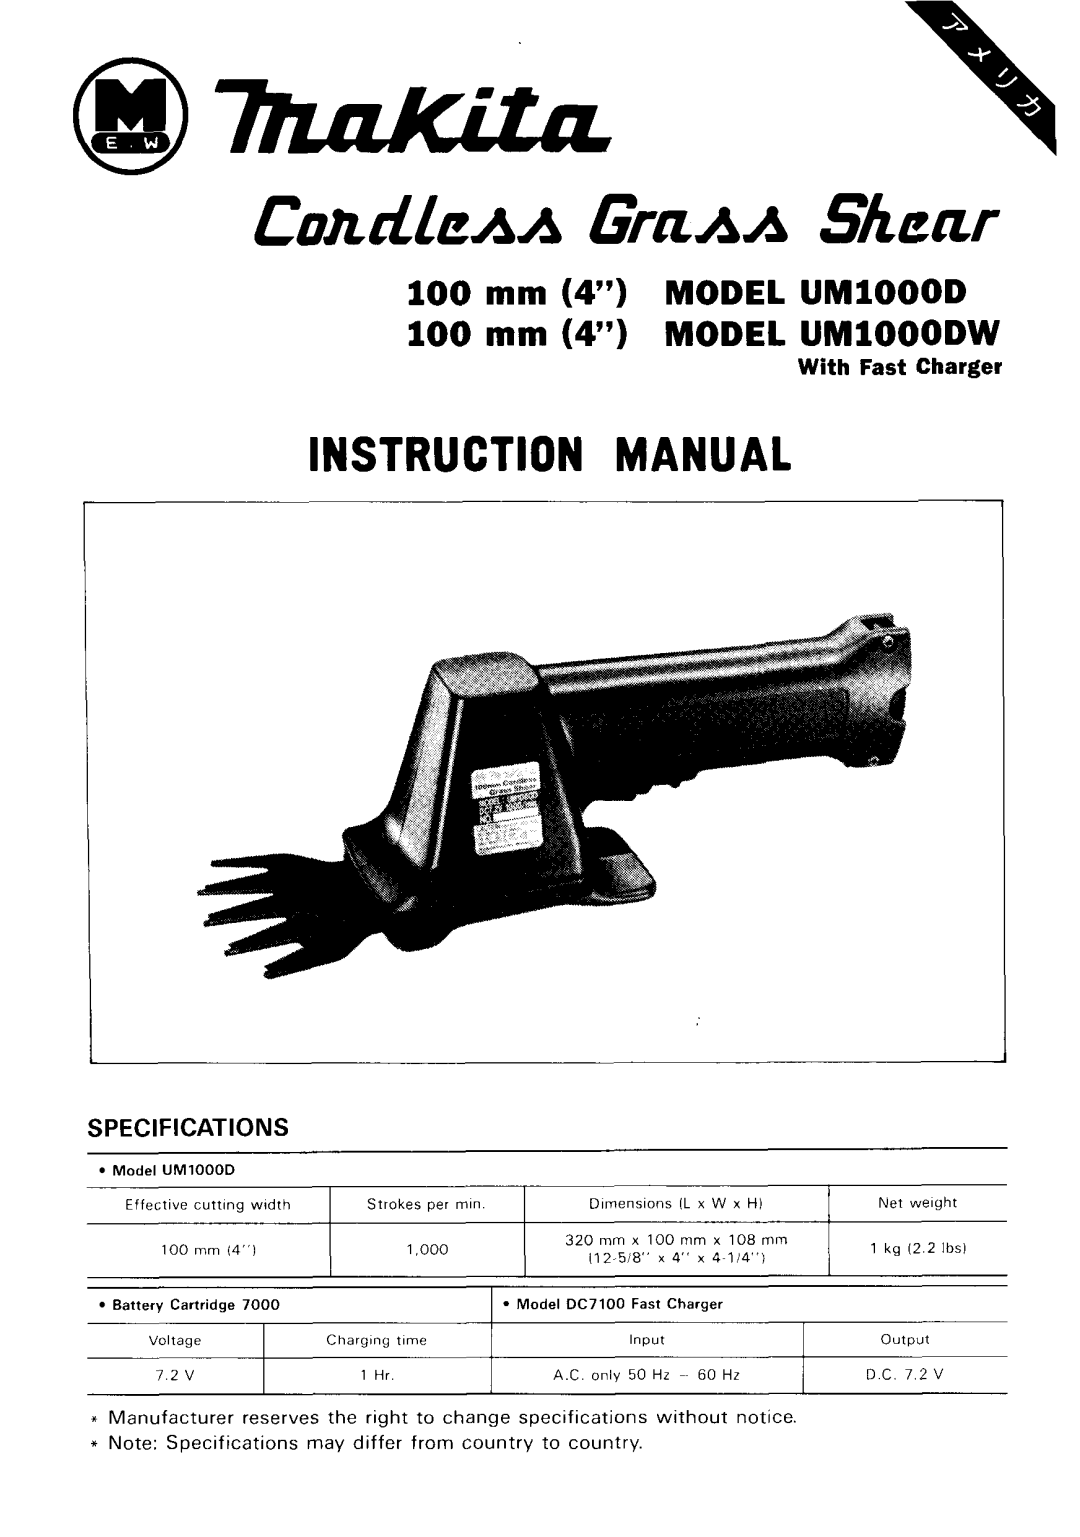 Makita UMLOOODW manual 100 mm 4 MODEL UMlOOOD 100 mm 4 MODEL UMlOOODW, Specifications, With Fast Charger, D C 7 